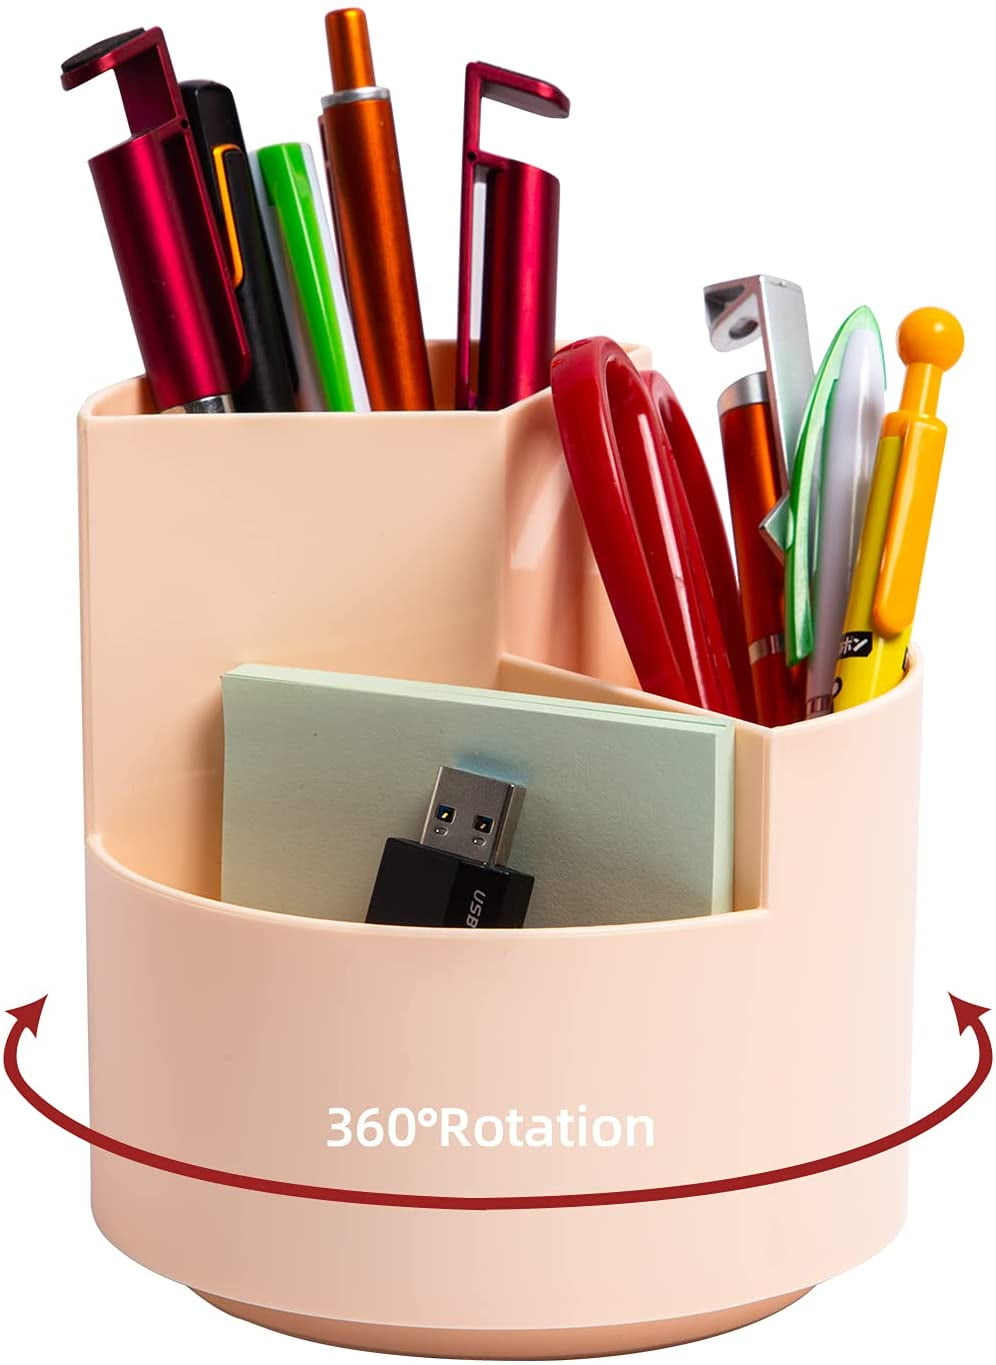 Office 3 Slots Desktop Storage Pen Organizers Desk Stationery Supplies Pencil Container Cup Pot Art Supply Accessories for Home Classroom MoKo Pen Pencil Holder 360°Rotating White 